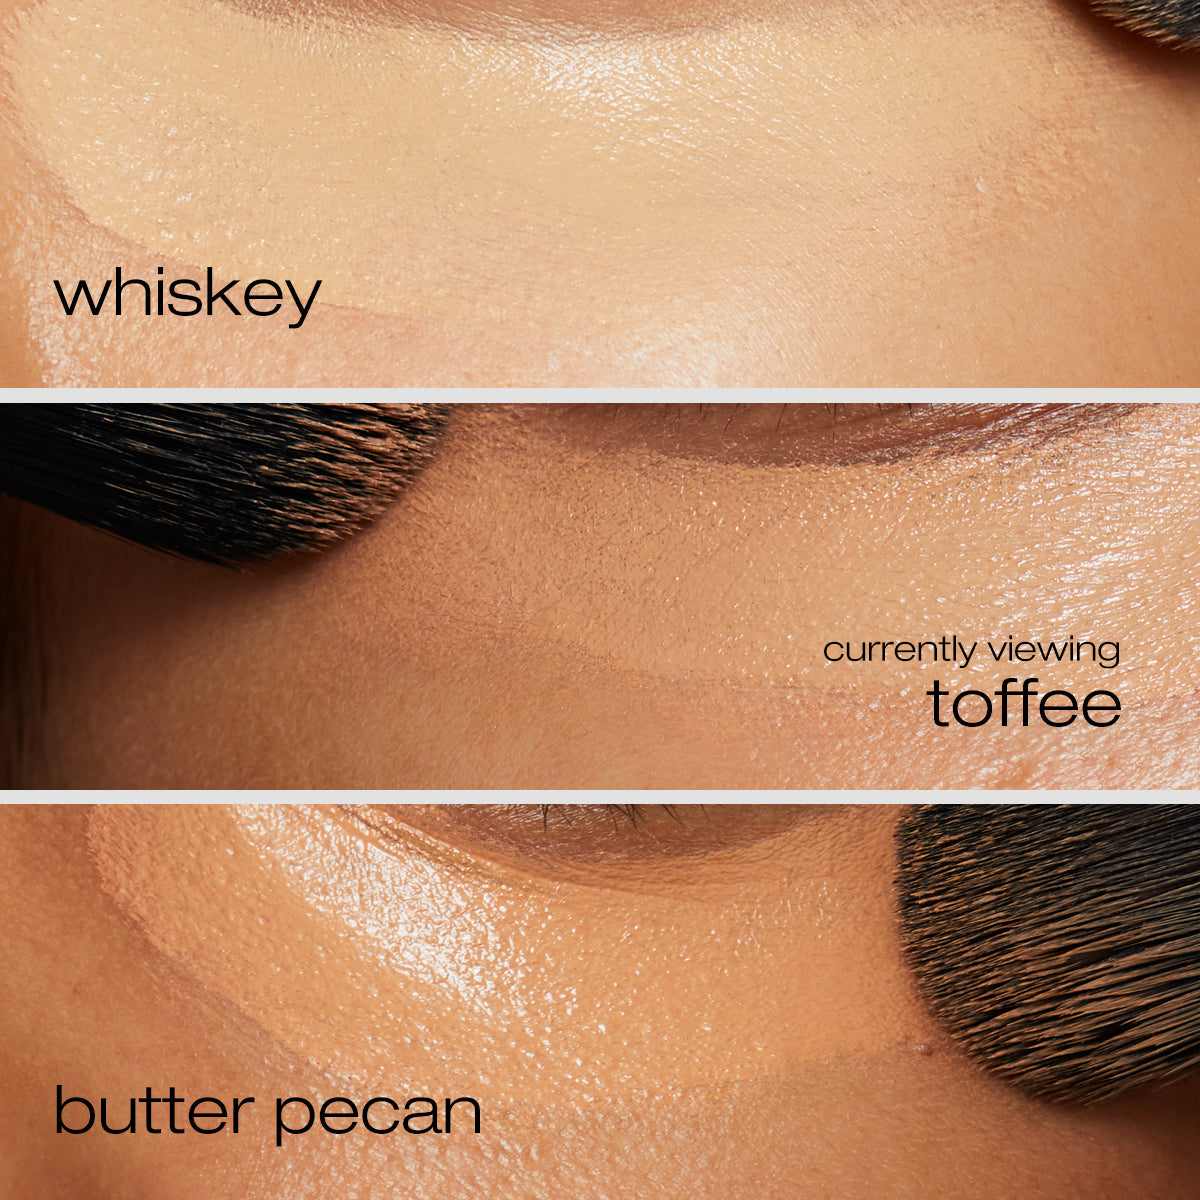 Whiskey, toffee, and butter pecan applied to undereyes